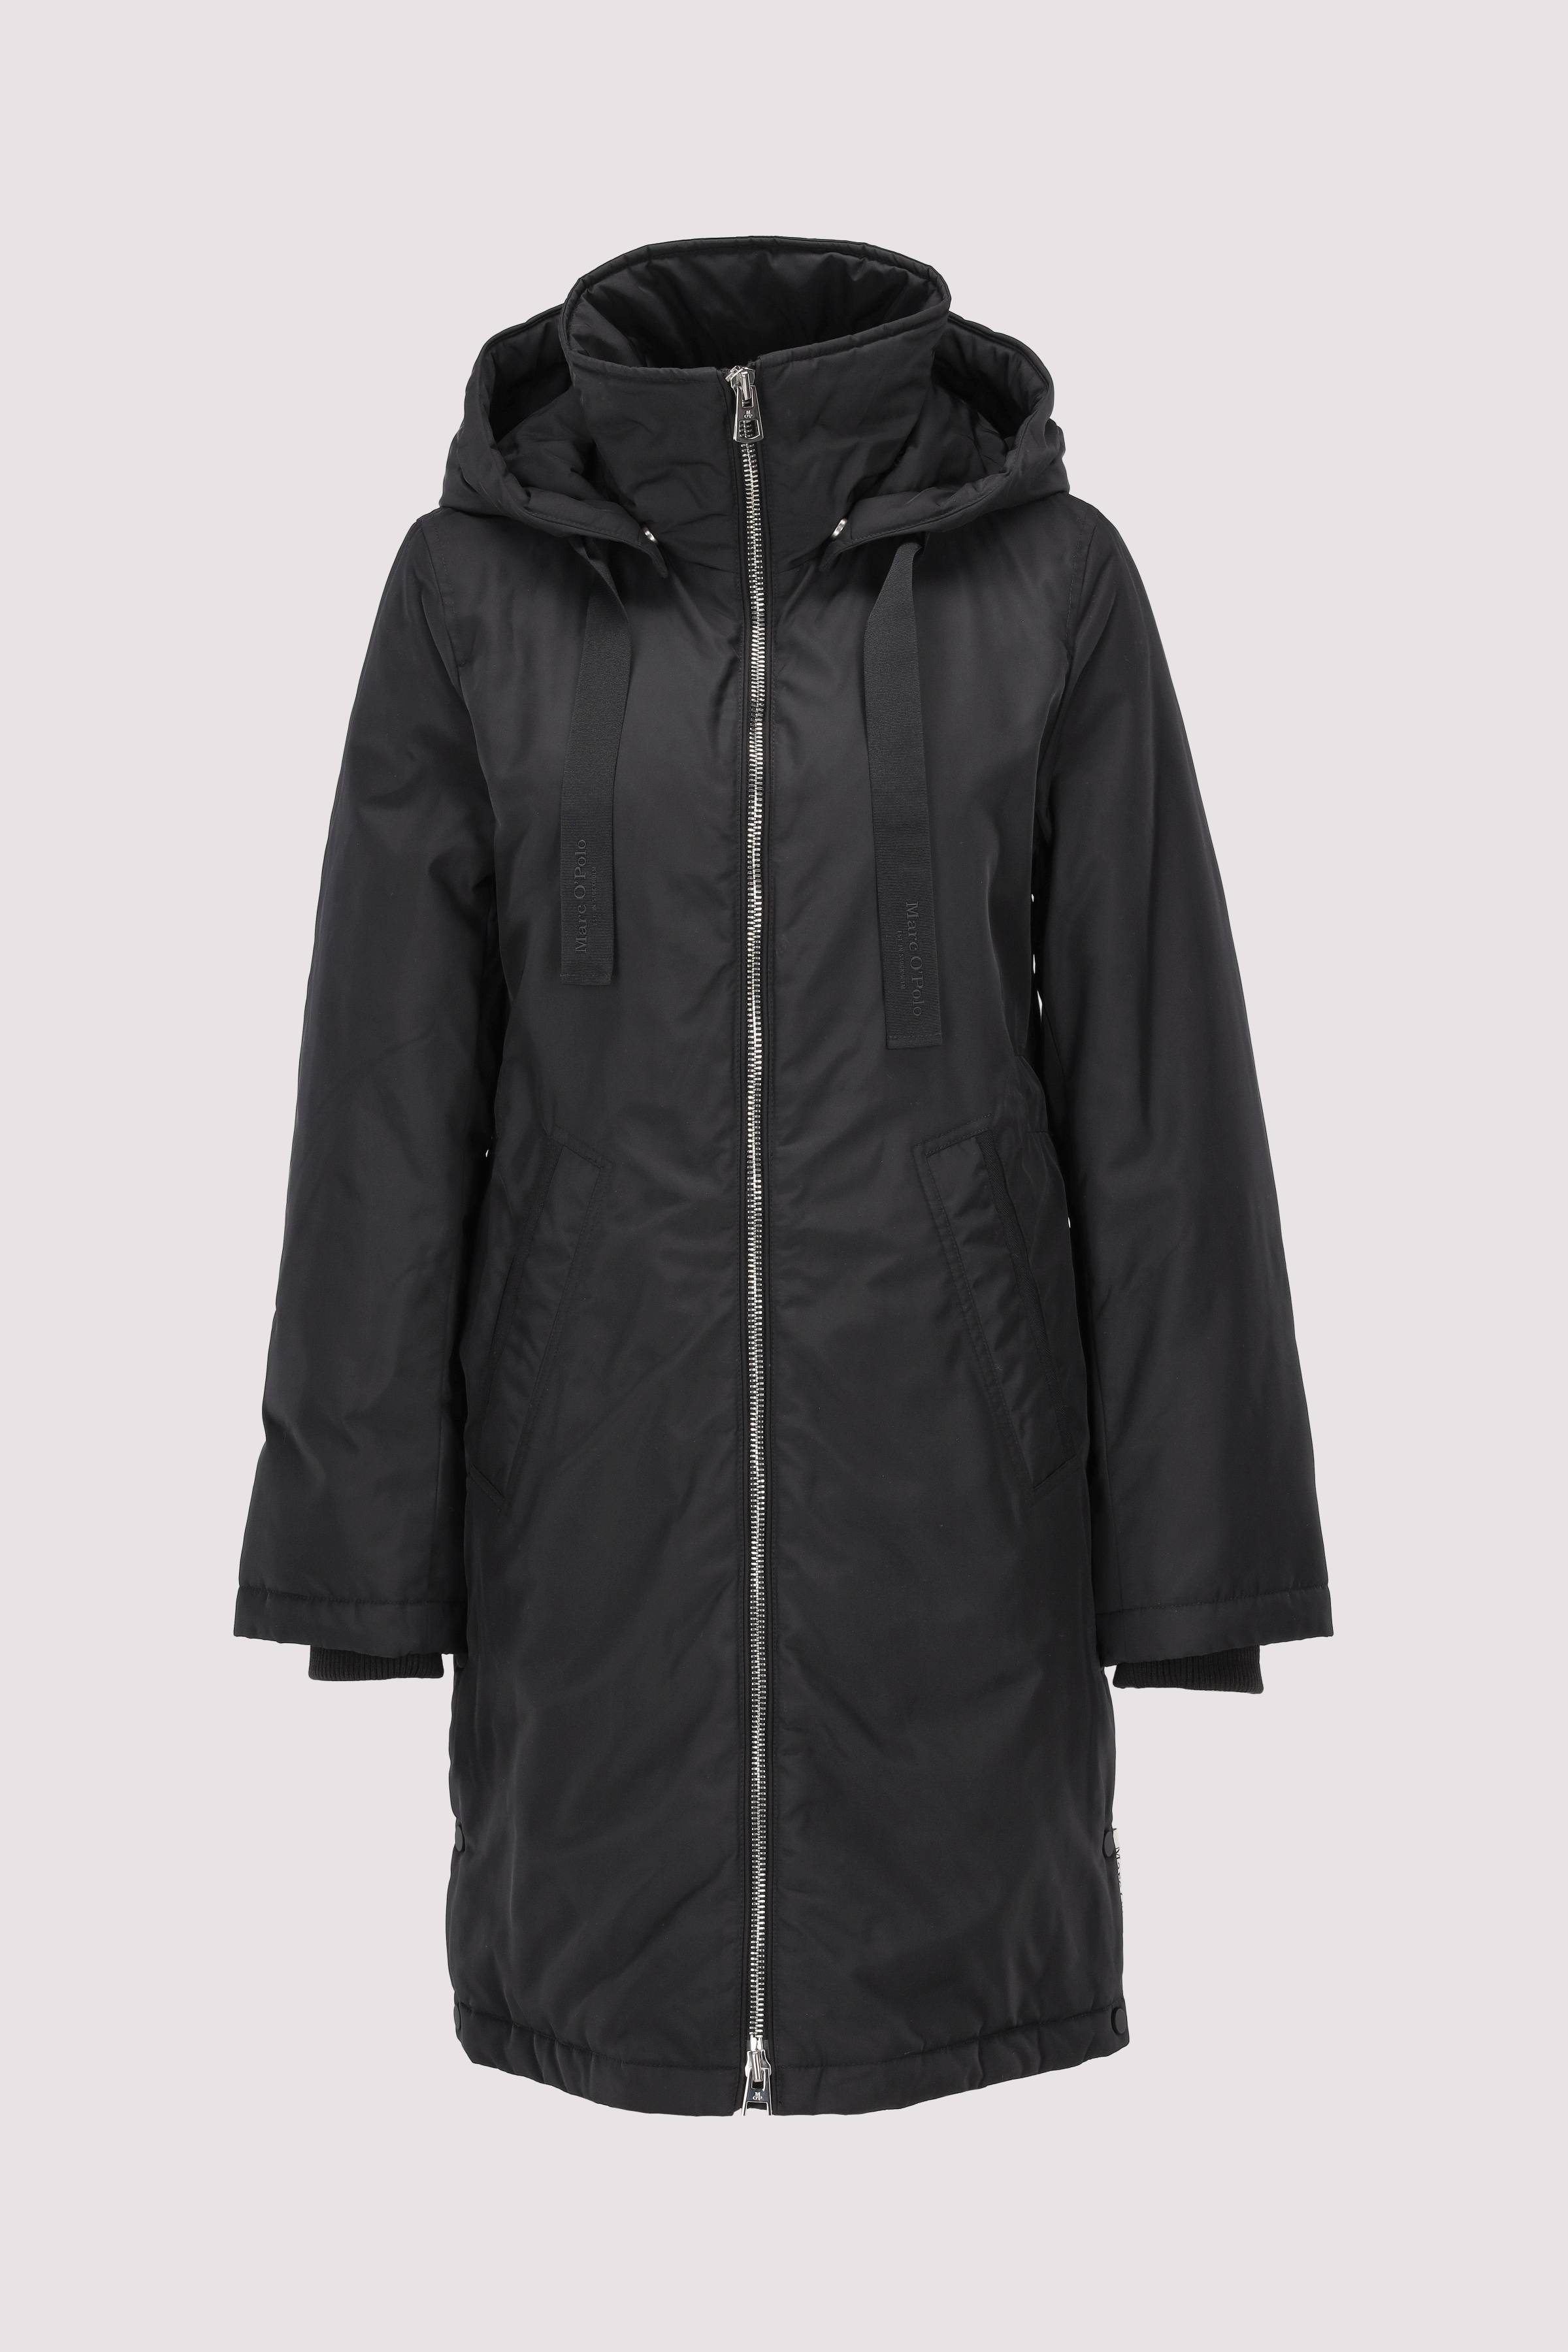 Parka, padded, quilted from th